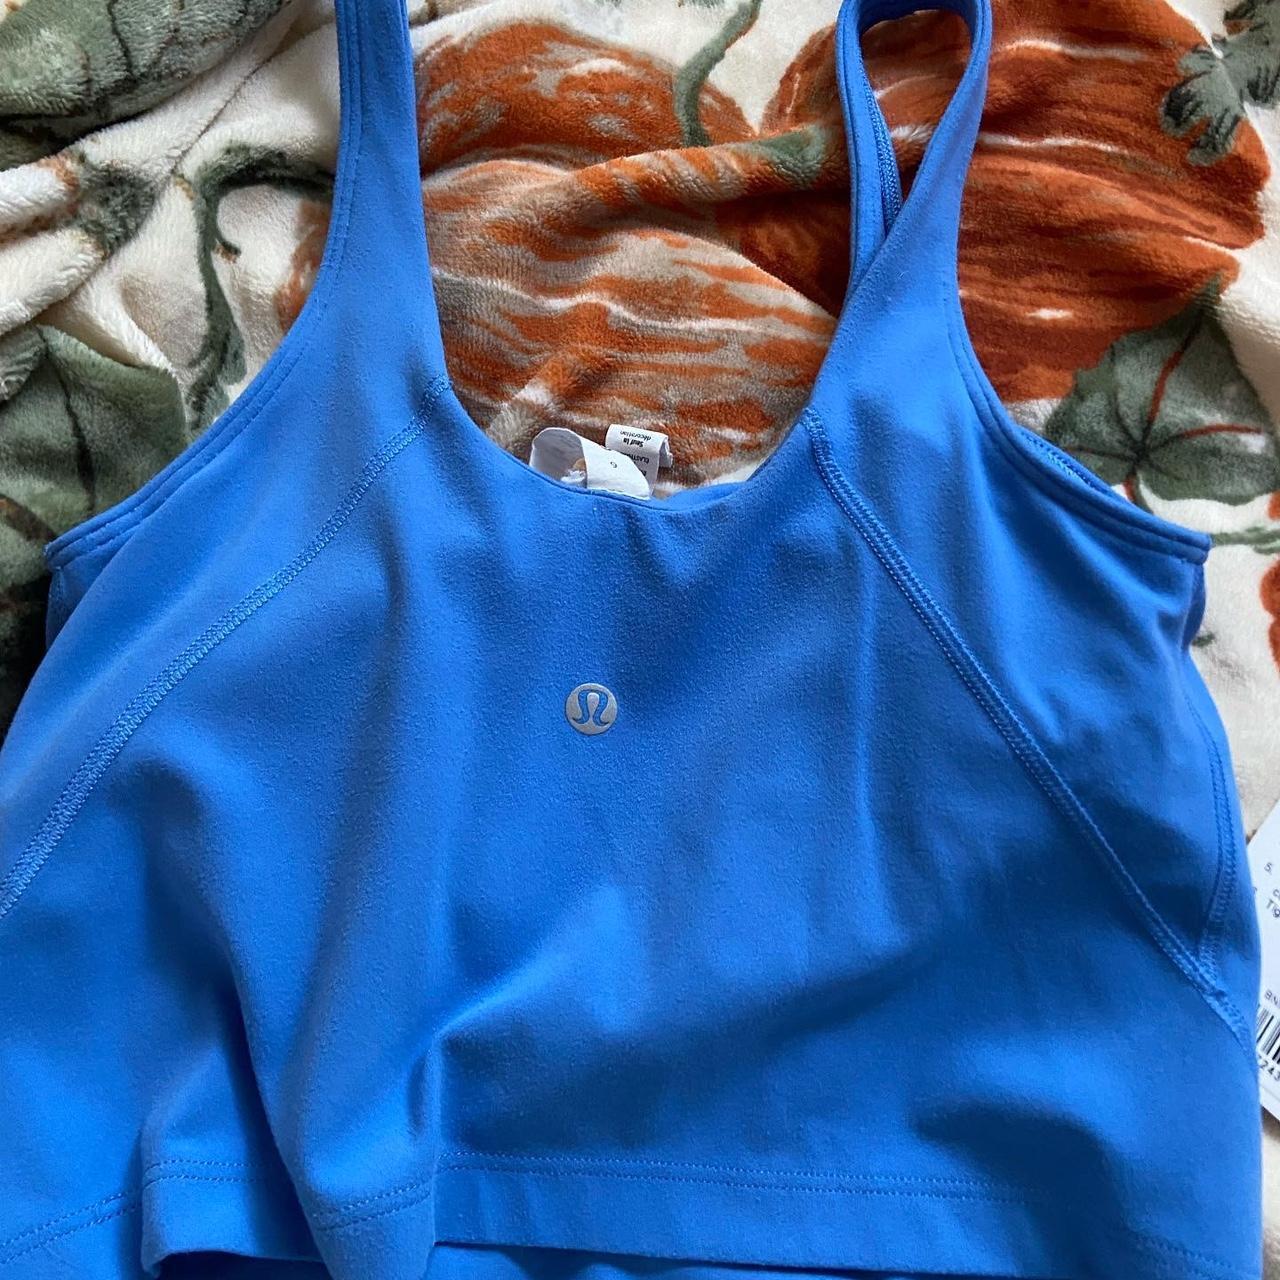 lulu align tank in blue nile size 6 , (comes with tag